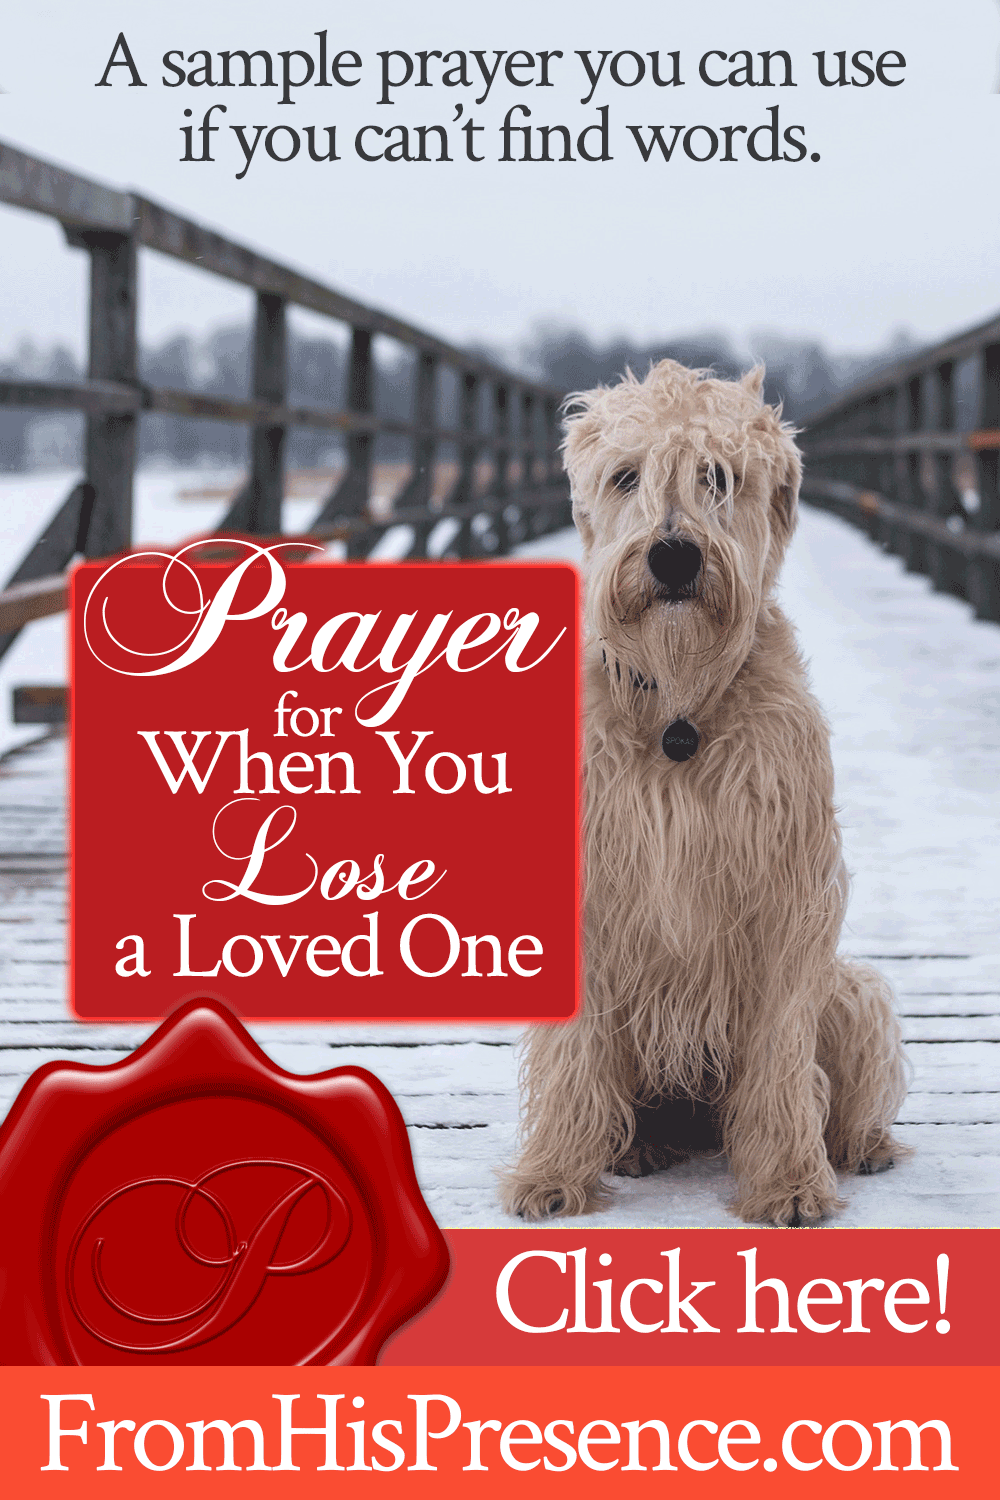 Prayer for When You Lose a Loved One | by Jamie Rohrbaugh | FromHisPresence.com